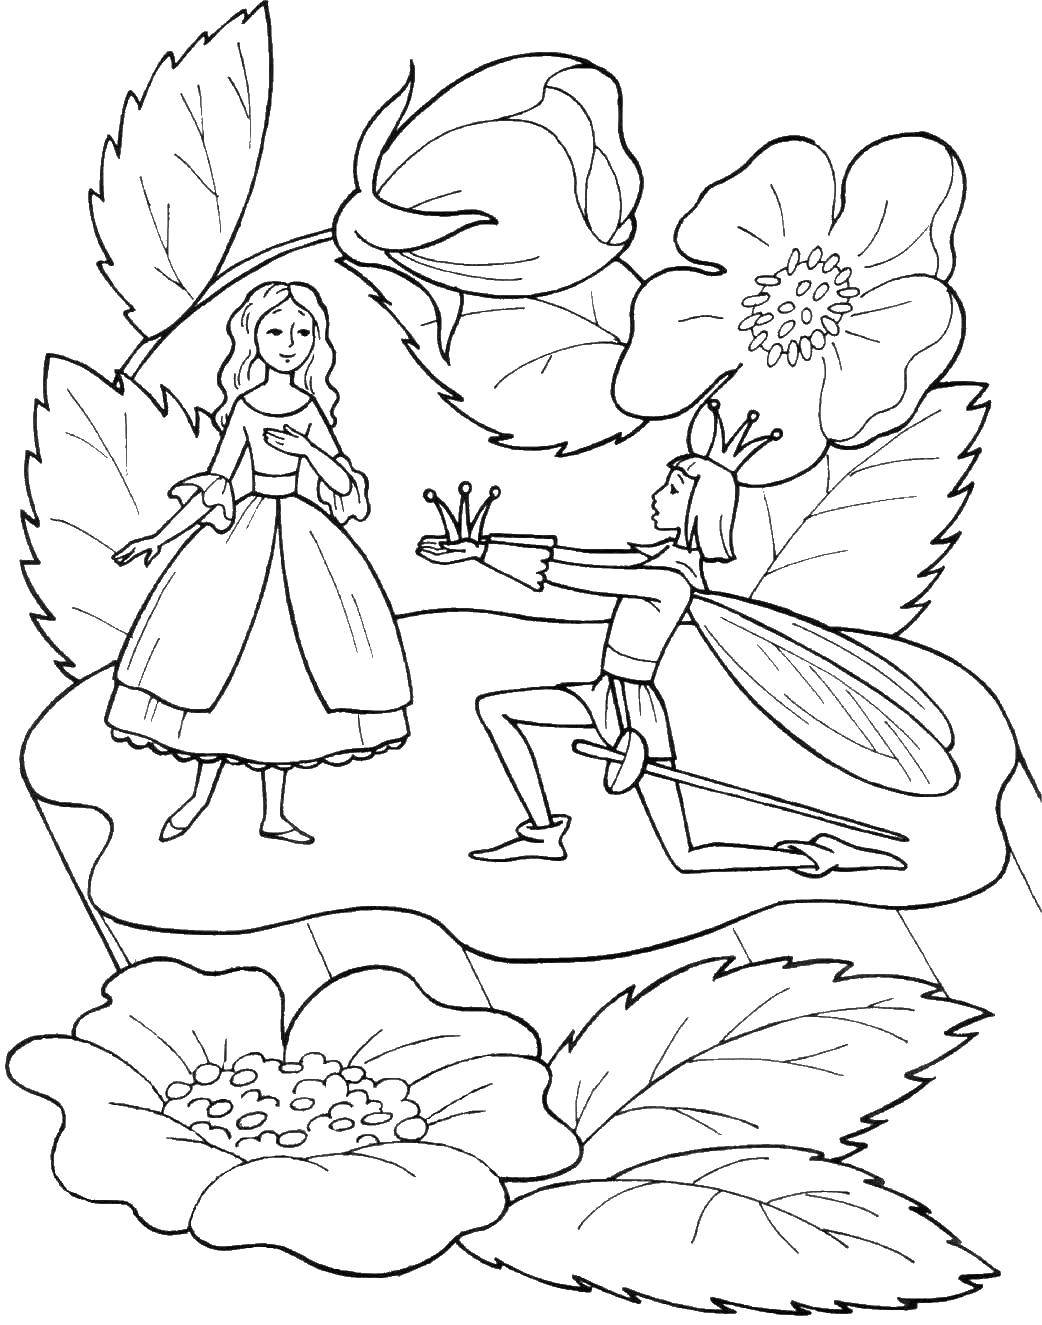 Coloring Thumbelina and the Prince. Category Fairy tales. Tags:  Thumbelina , The Prince.